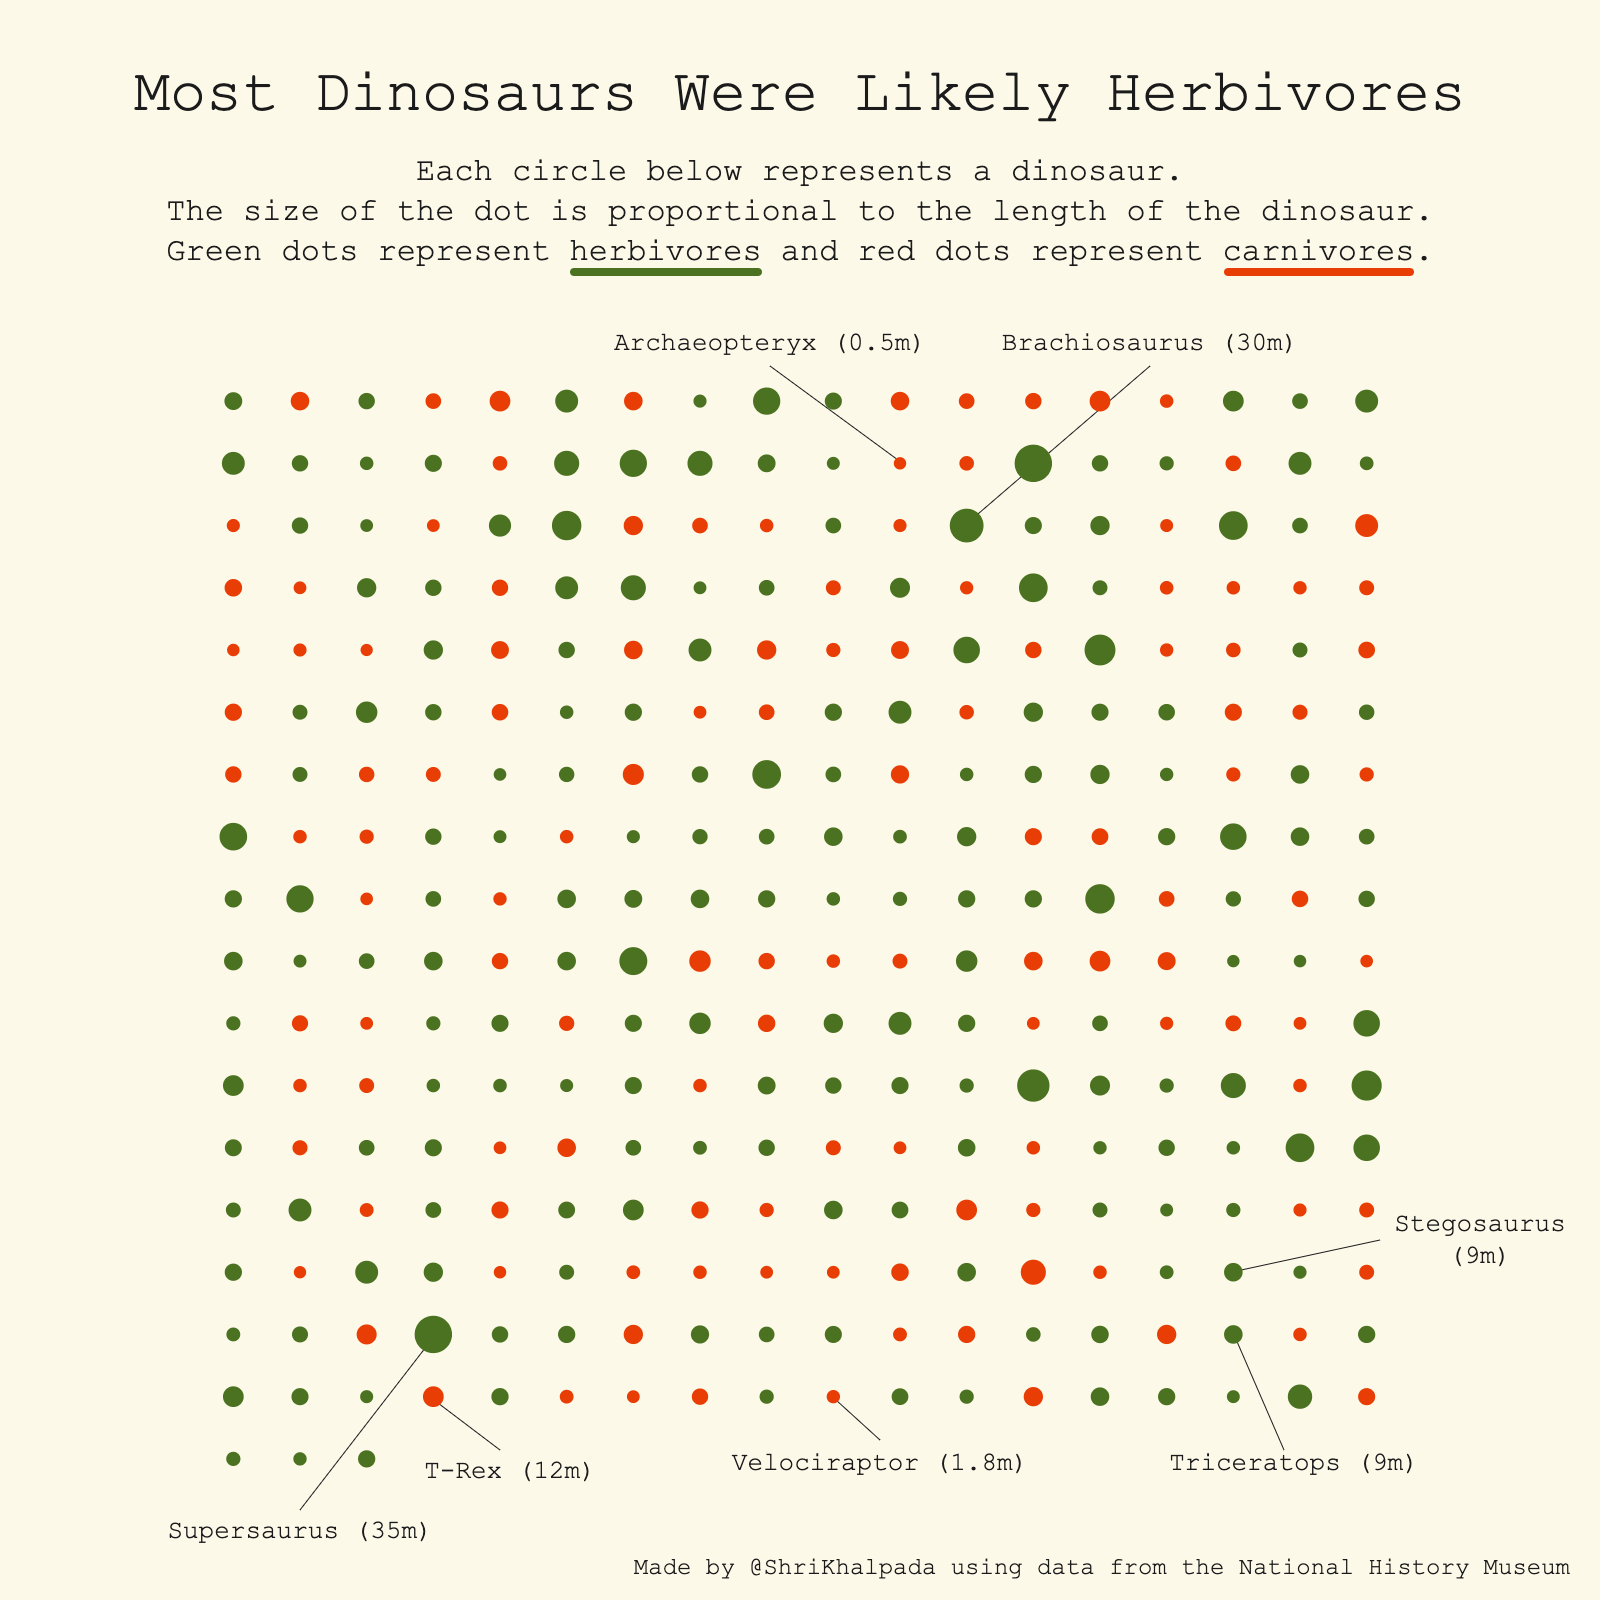 A scatter plot titled "Most Dinosaurs Were Likely Herbivores" with dots of varying sizes representing different dinosaur species, where green dots are herbivores and red dots are carnivores.